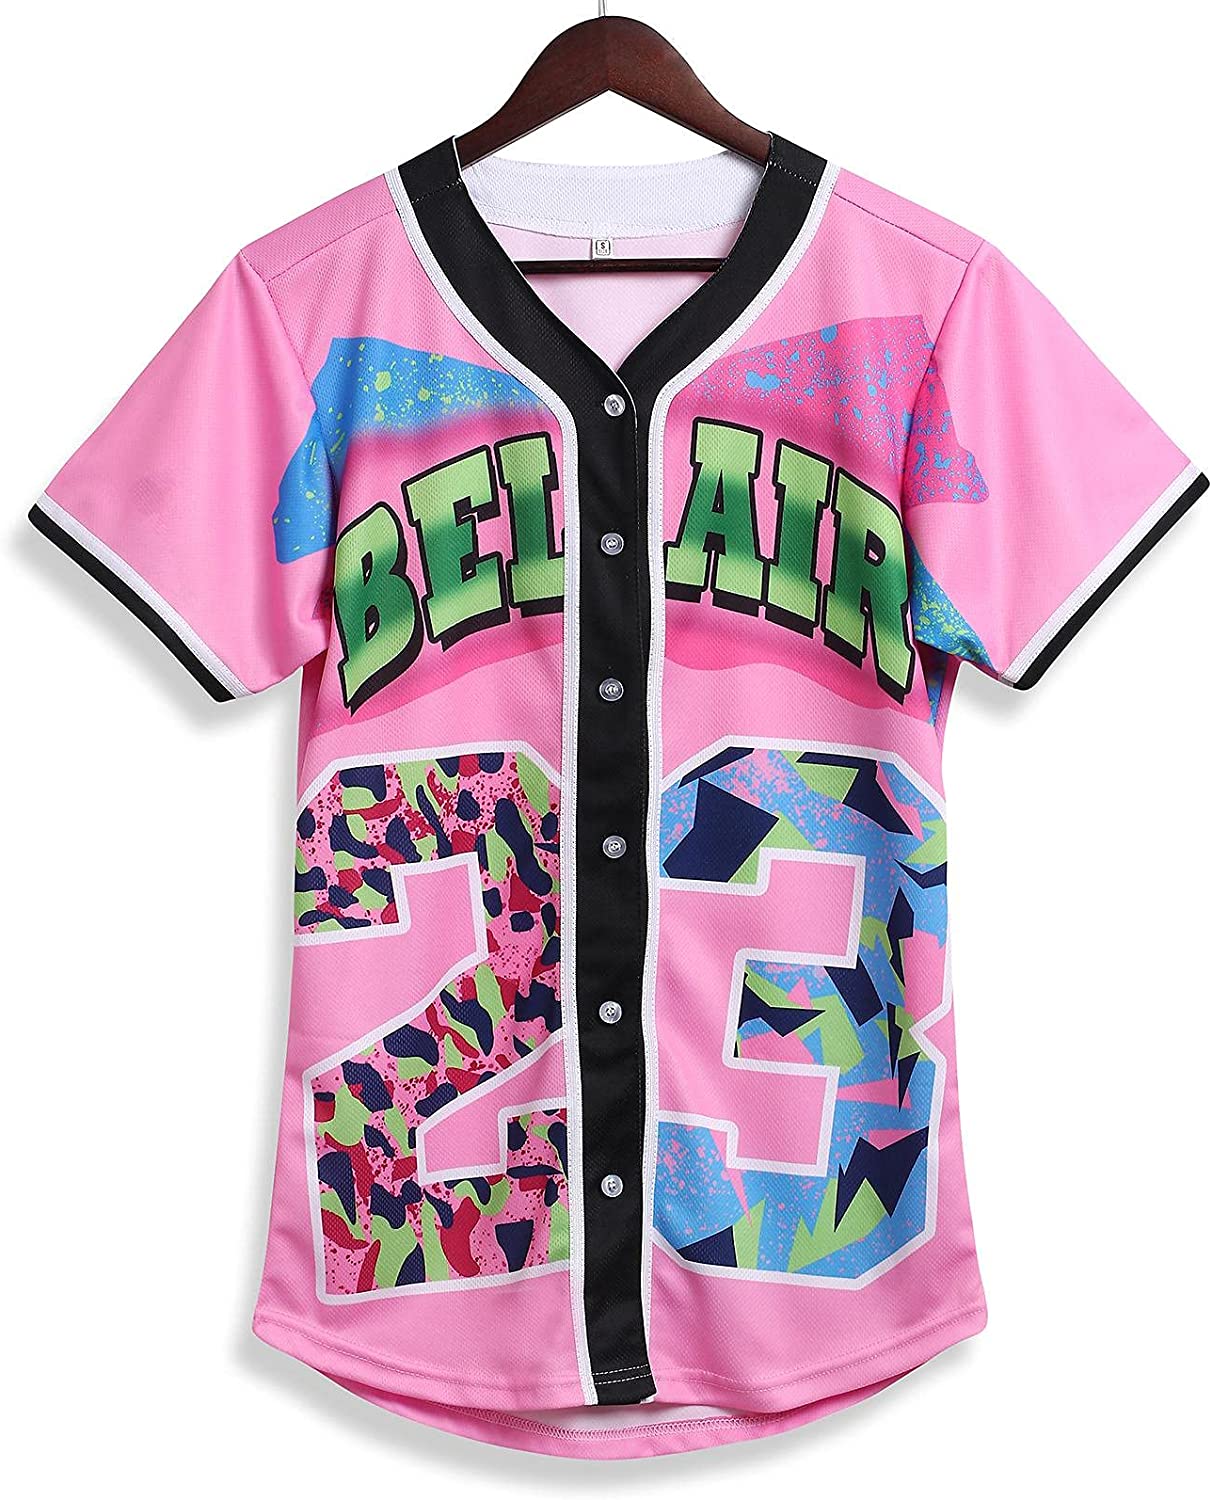 90s Outfit For Women White And Black 23 Hip Hop Baseball Jersey